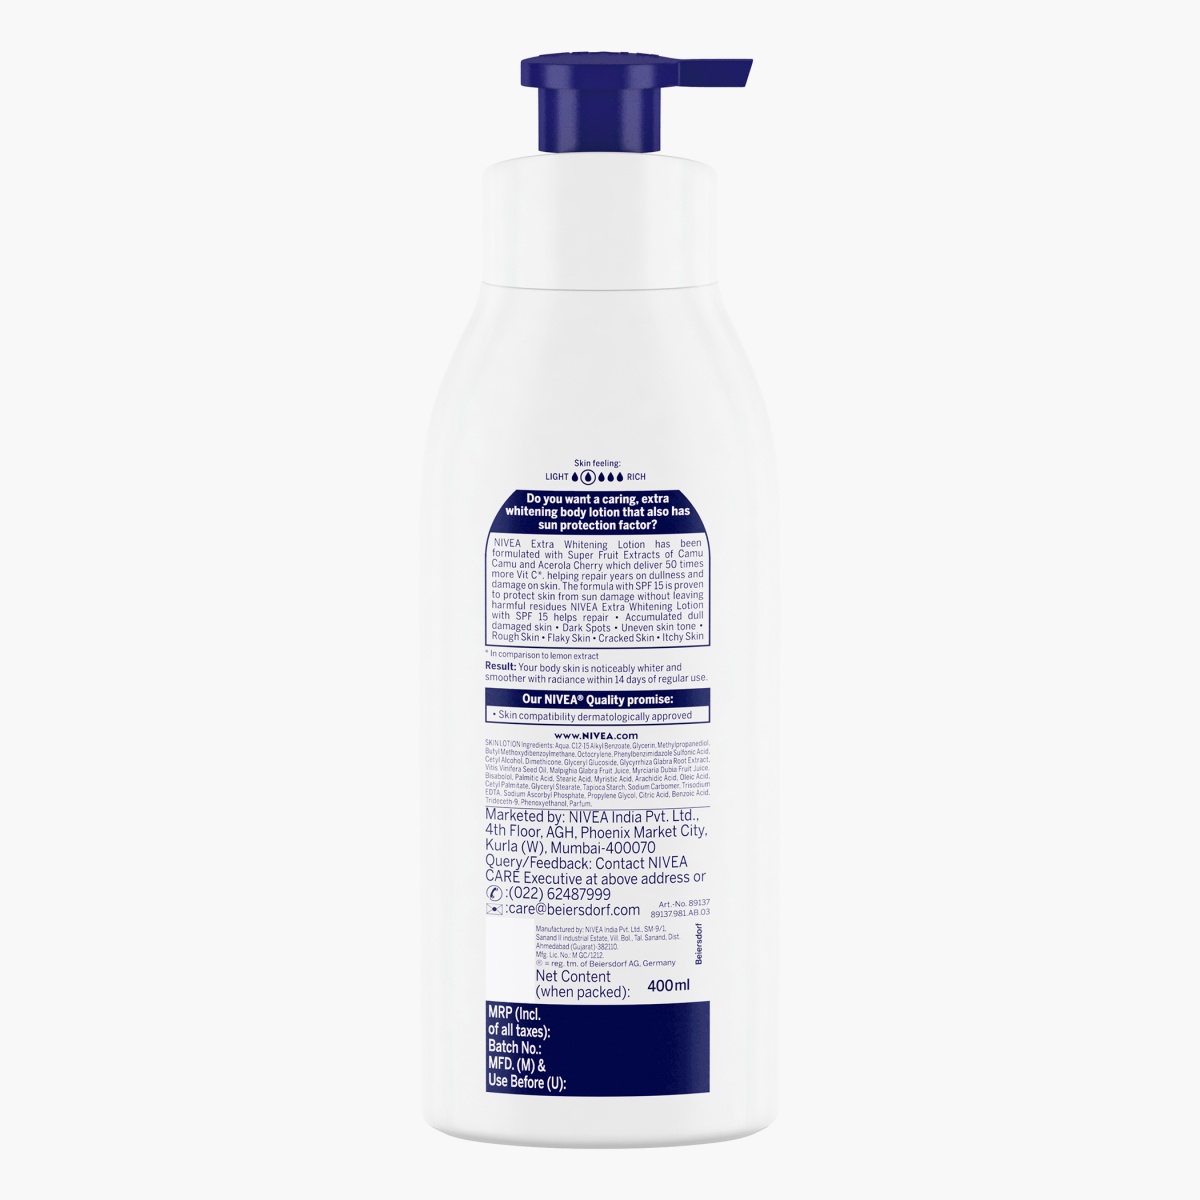 NIVEA Extra Whitening Cell Repair Body Lotion-SPF 15